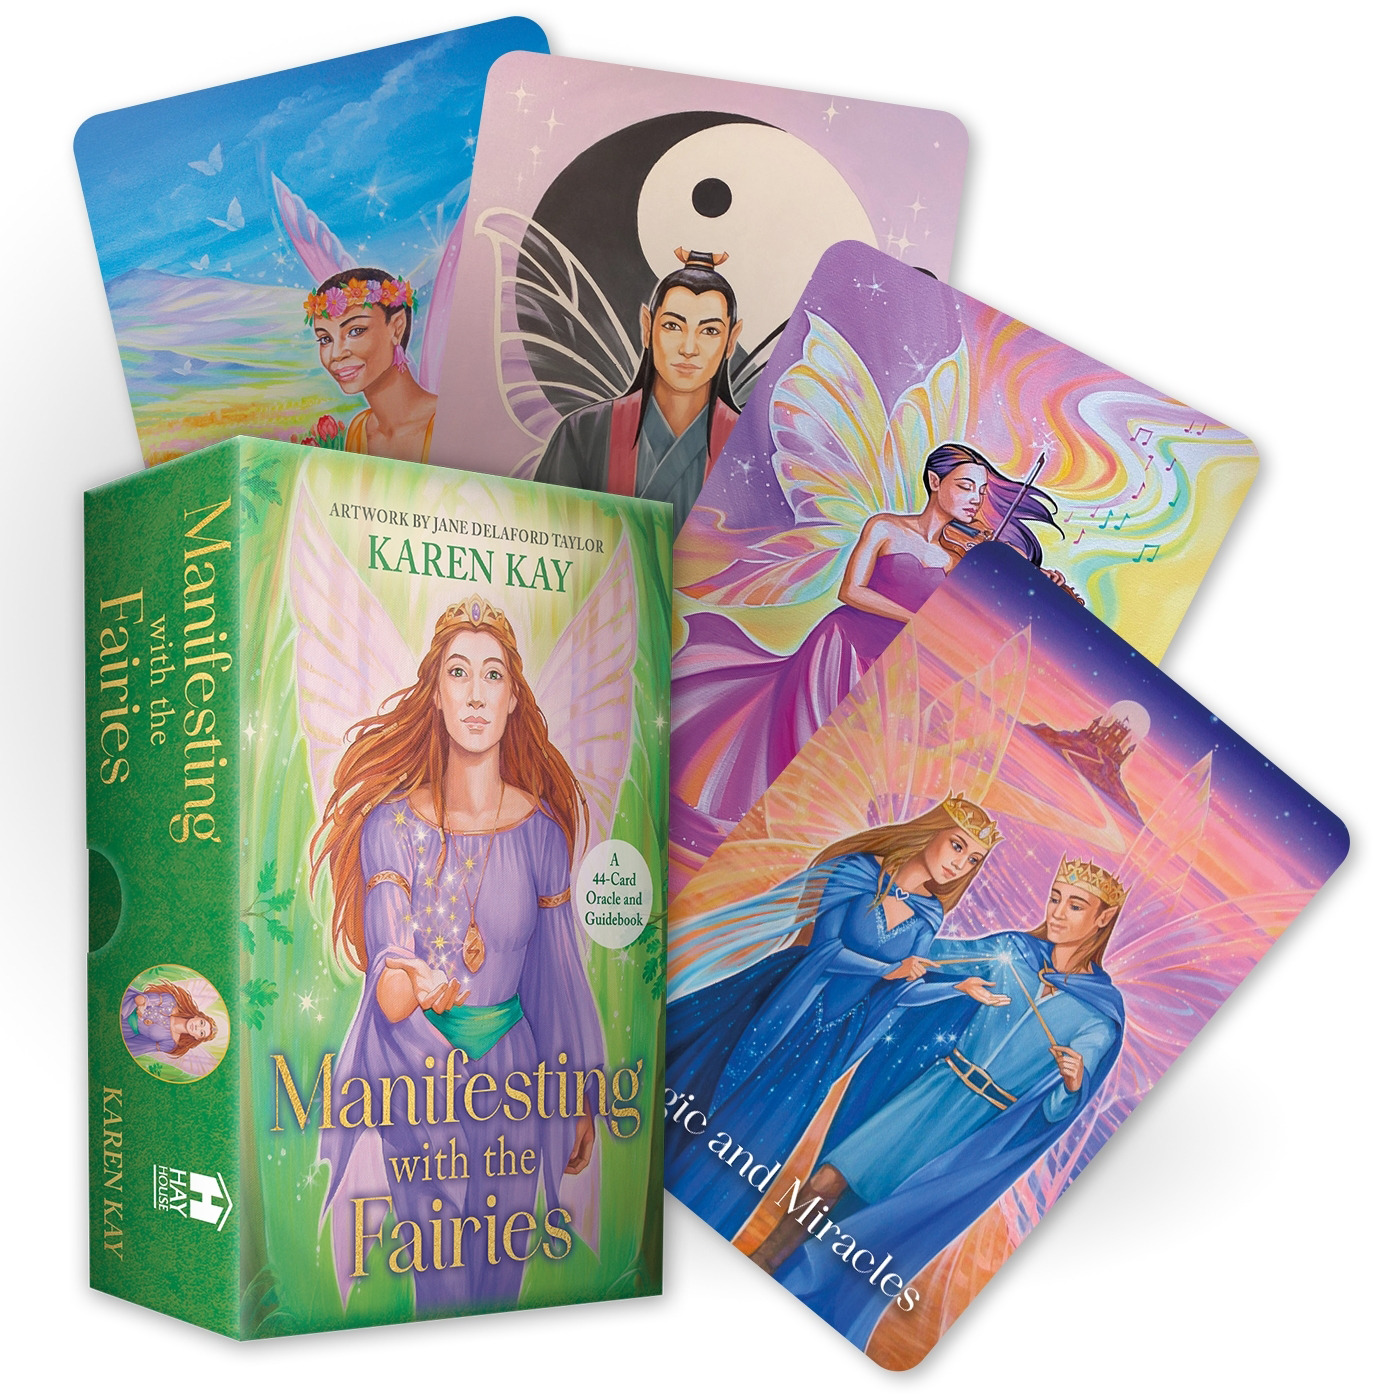 Manifesting with the Fairies : A 44-Card Oracle and Guidebook | Kay, Karen (Auteur) | Delaford Taylor, Jane (Illustrateur)